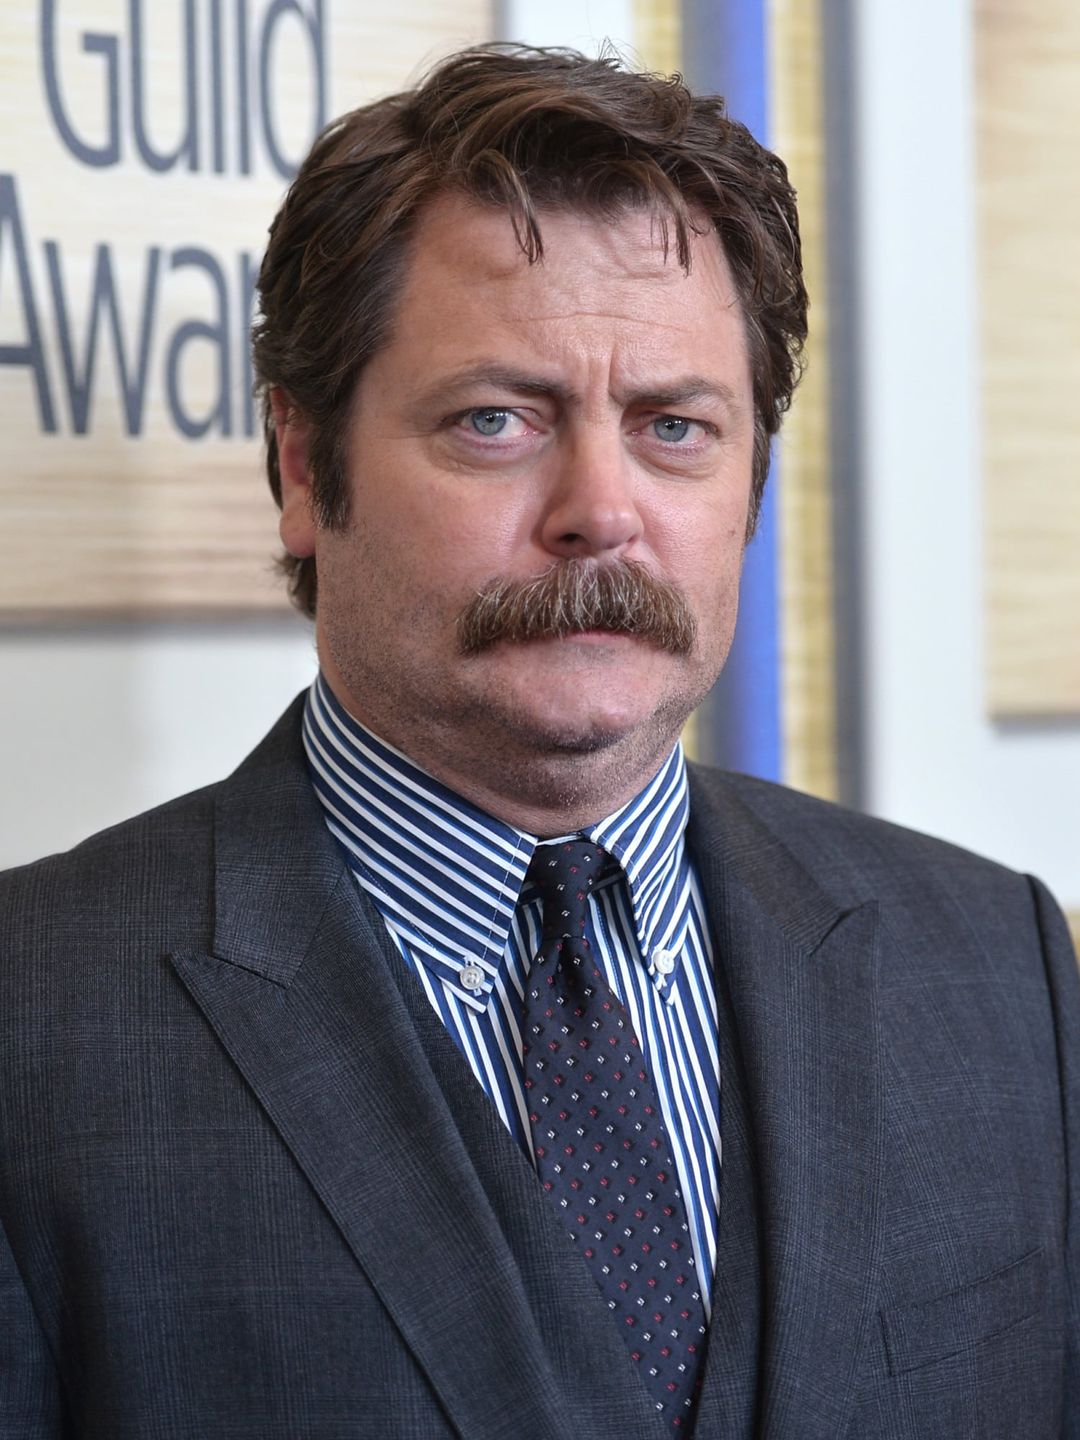 Nick Offerman in real life